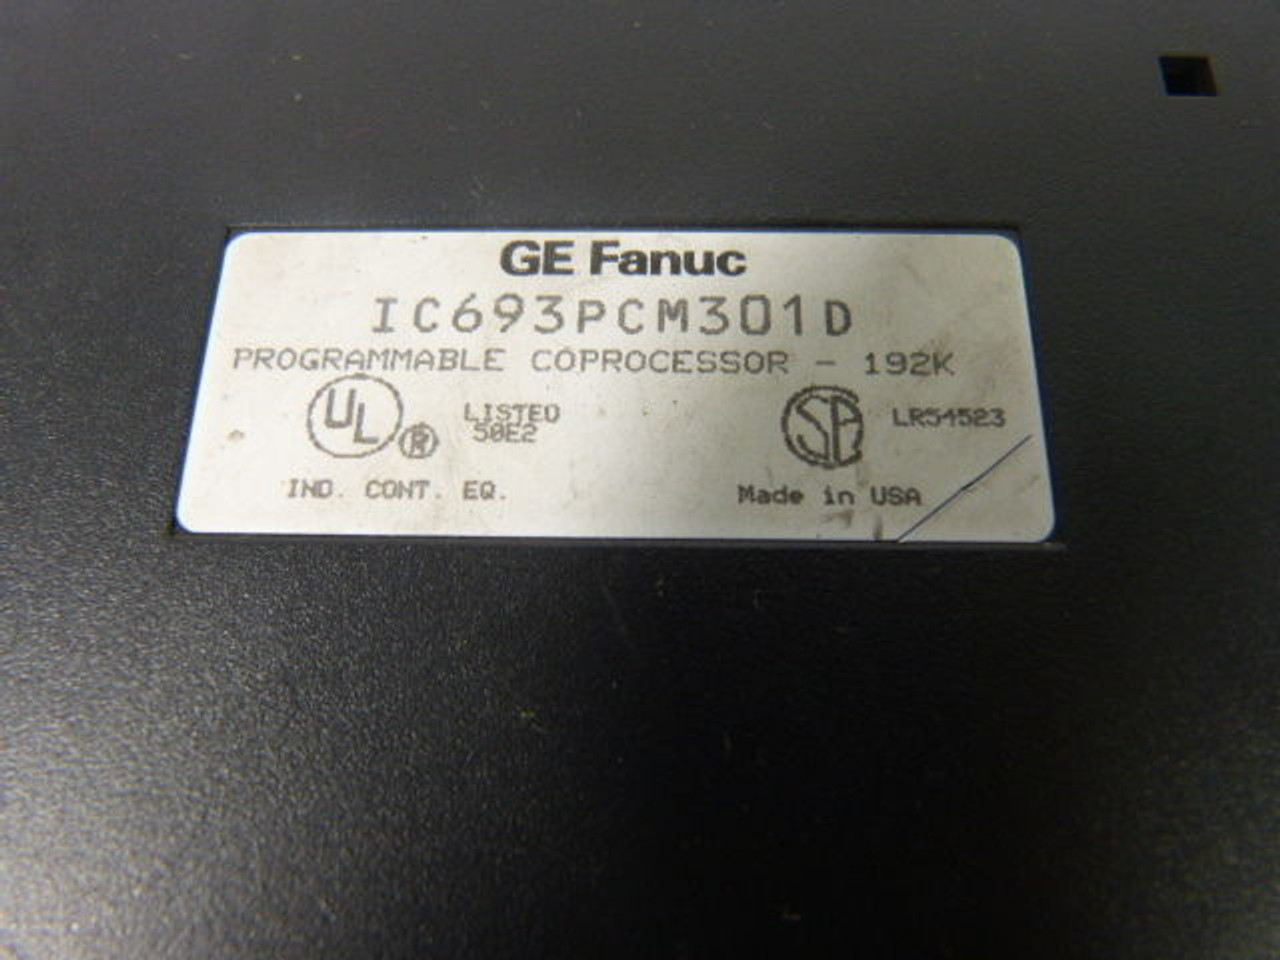 Fanuc IC693PCM301D Programmable Coprocessor *Missing Front Cover* USED